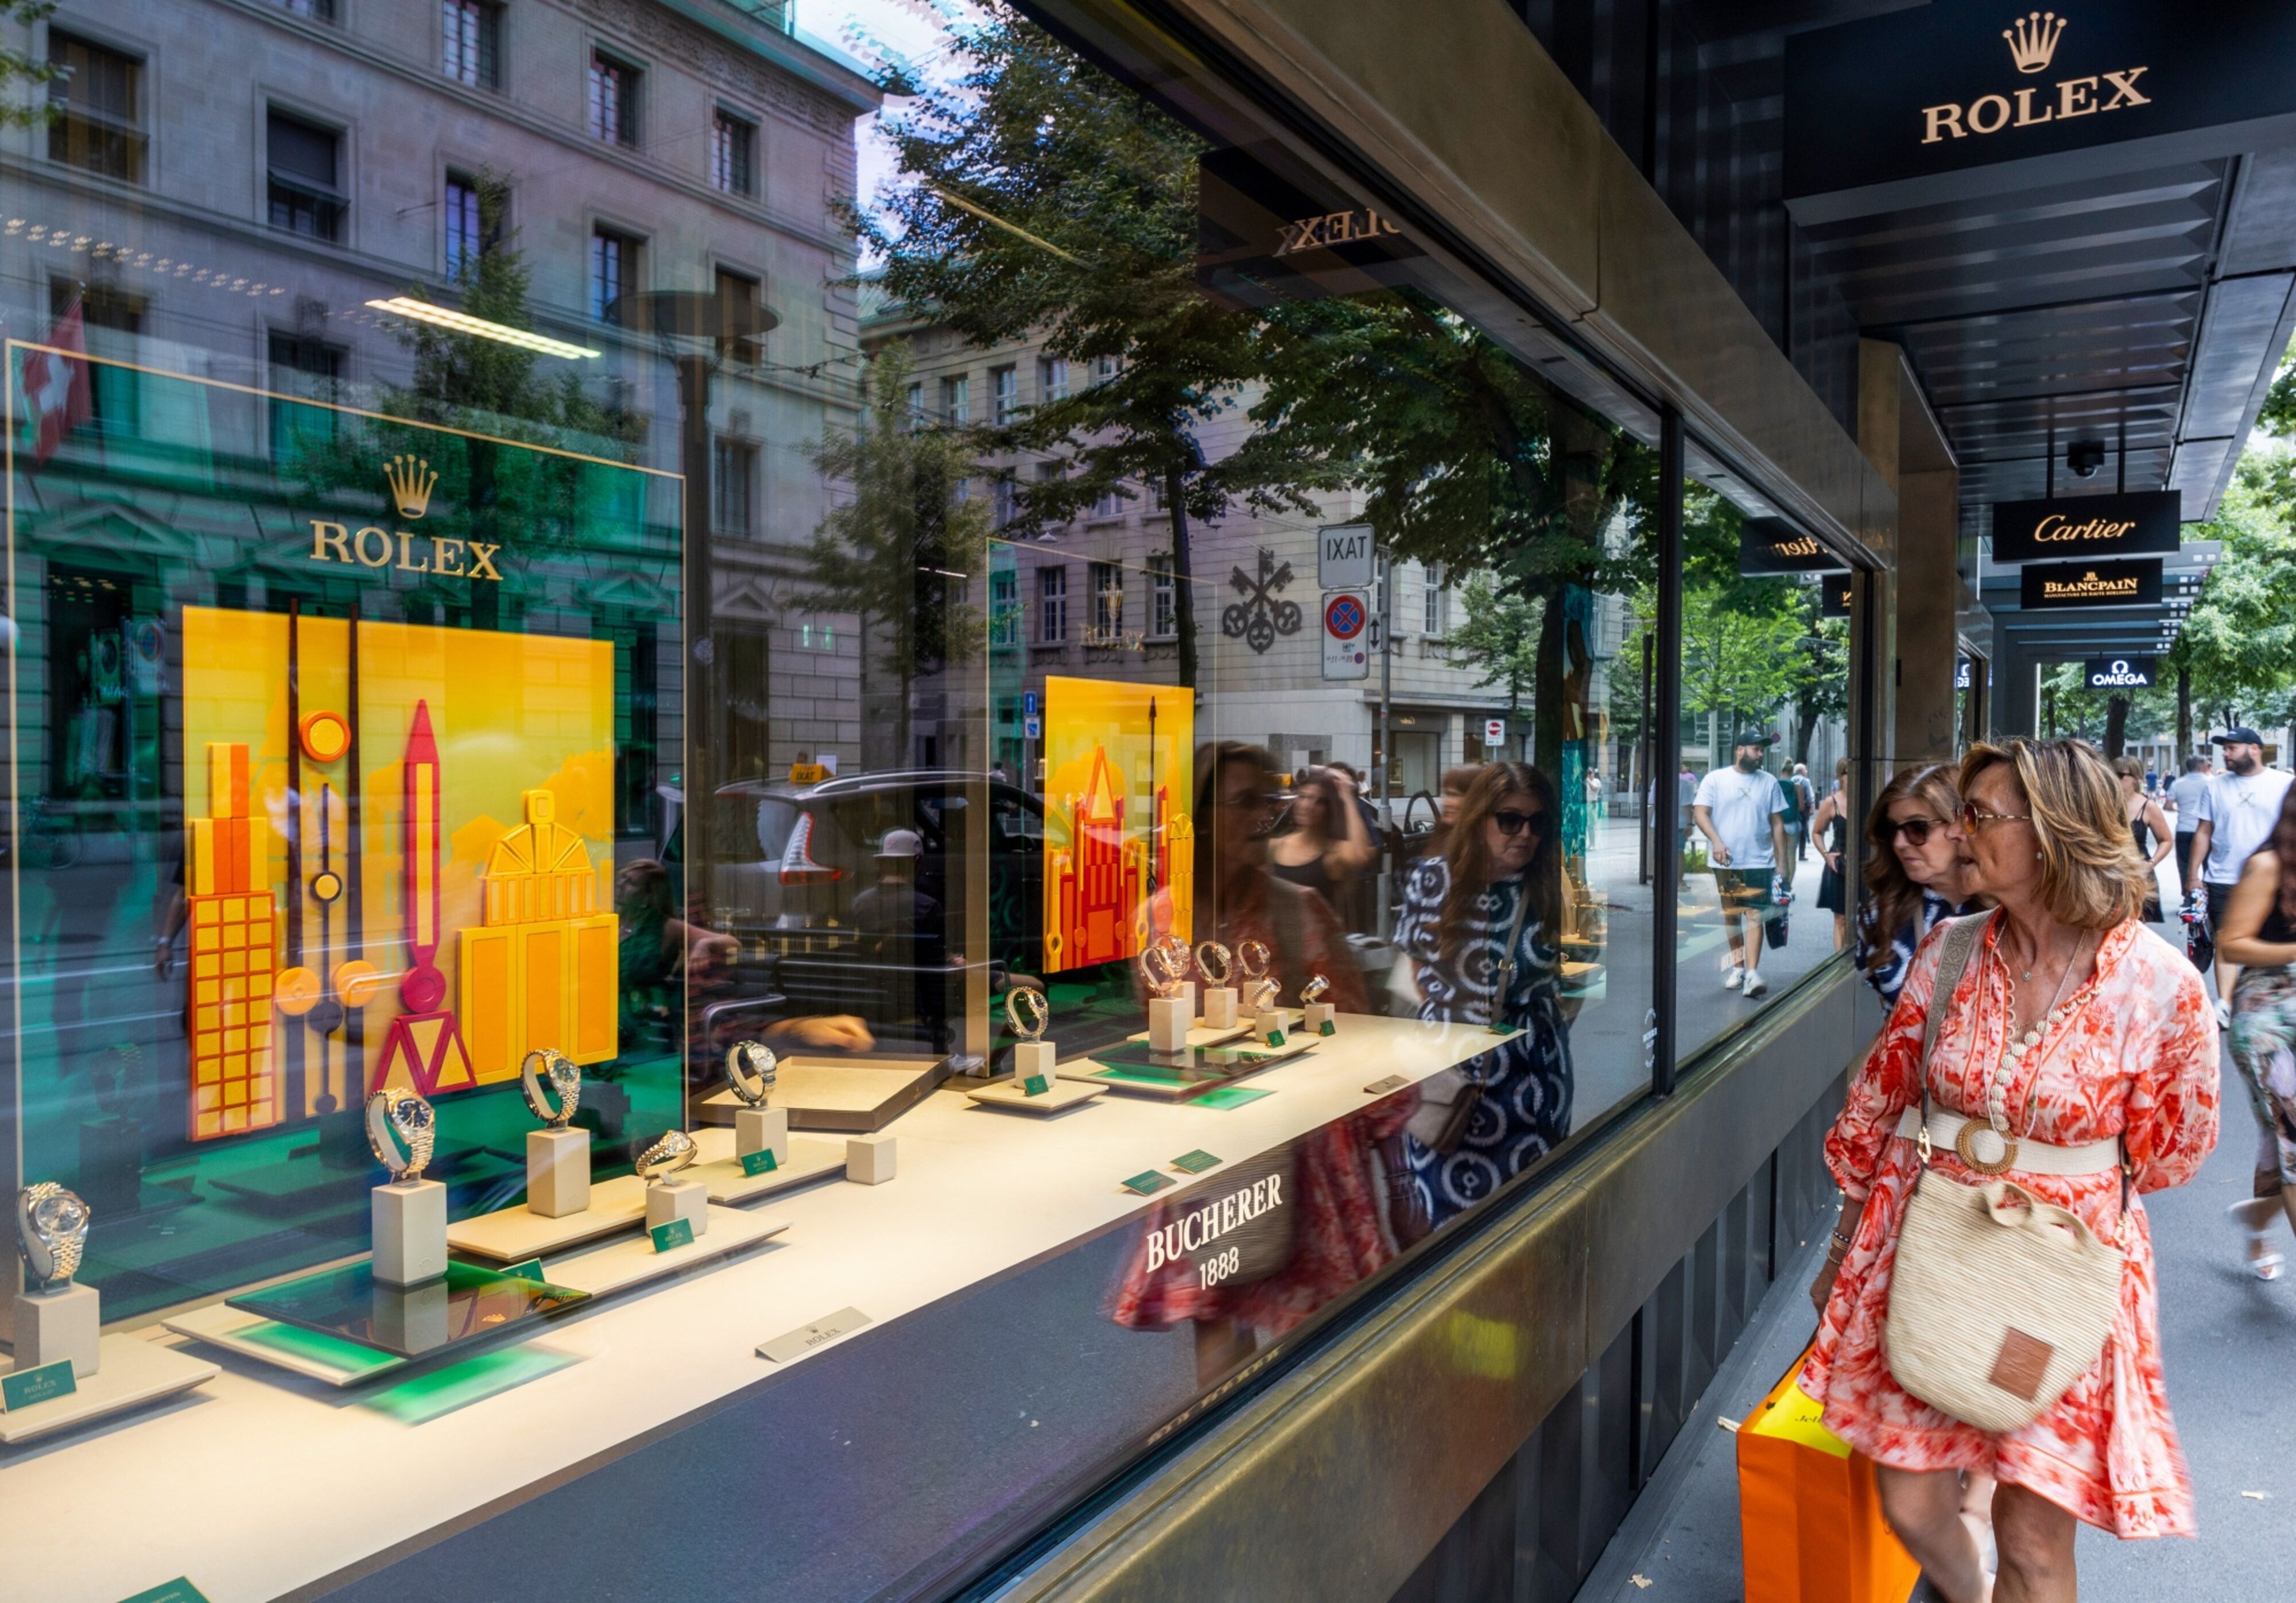 Shoppers browse a display of Rolex watches in the window of a Bucherer store in Zurich. (Foto: Bloomberg)